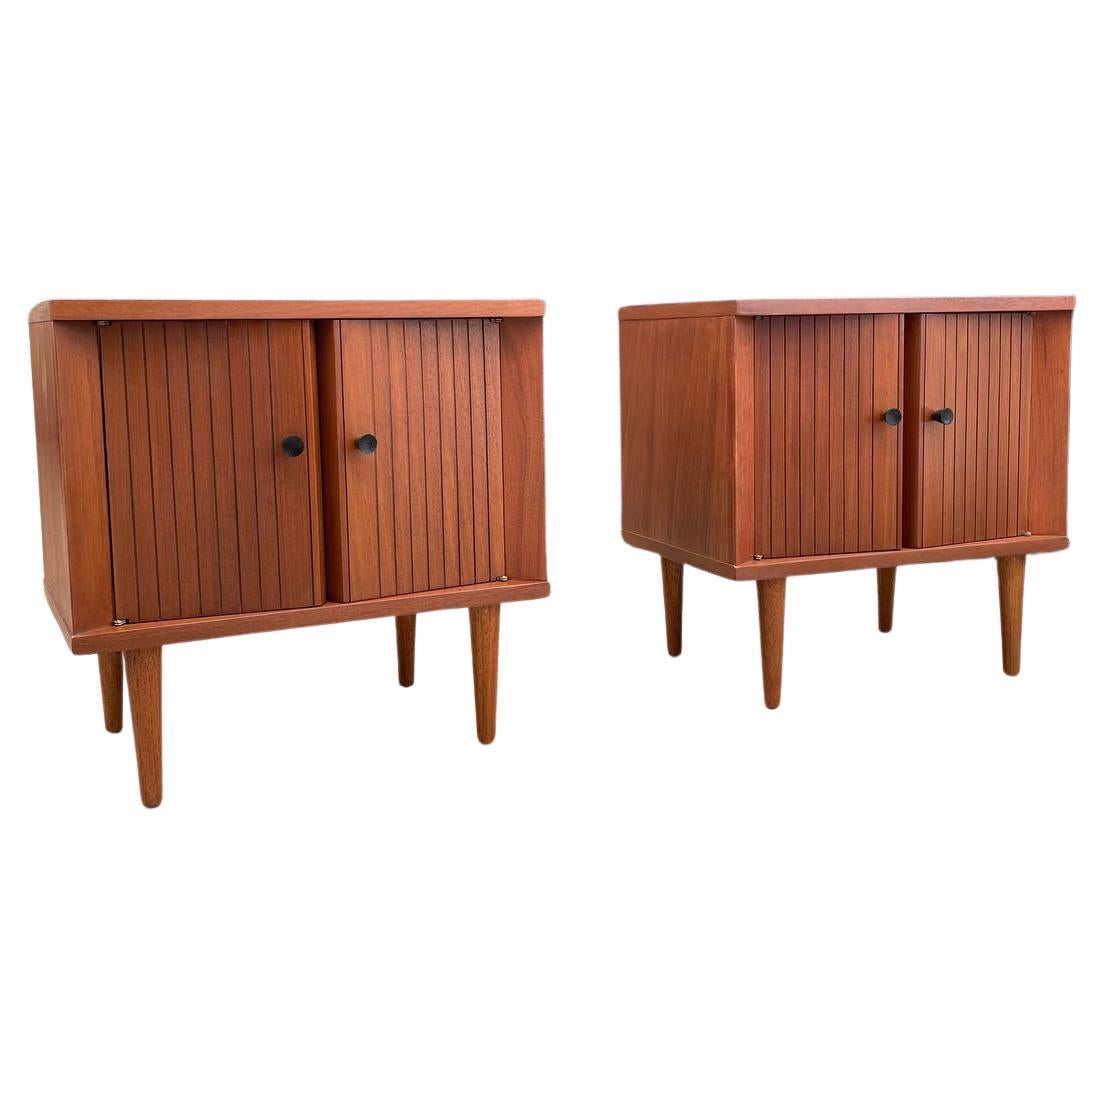 Newly Refinished - Pair of Mid-Century Modern Walnut Night Stands by Basic-Witz